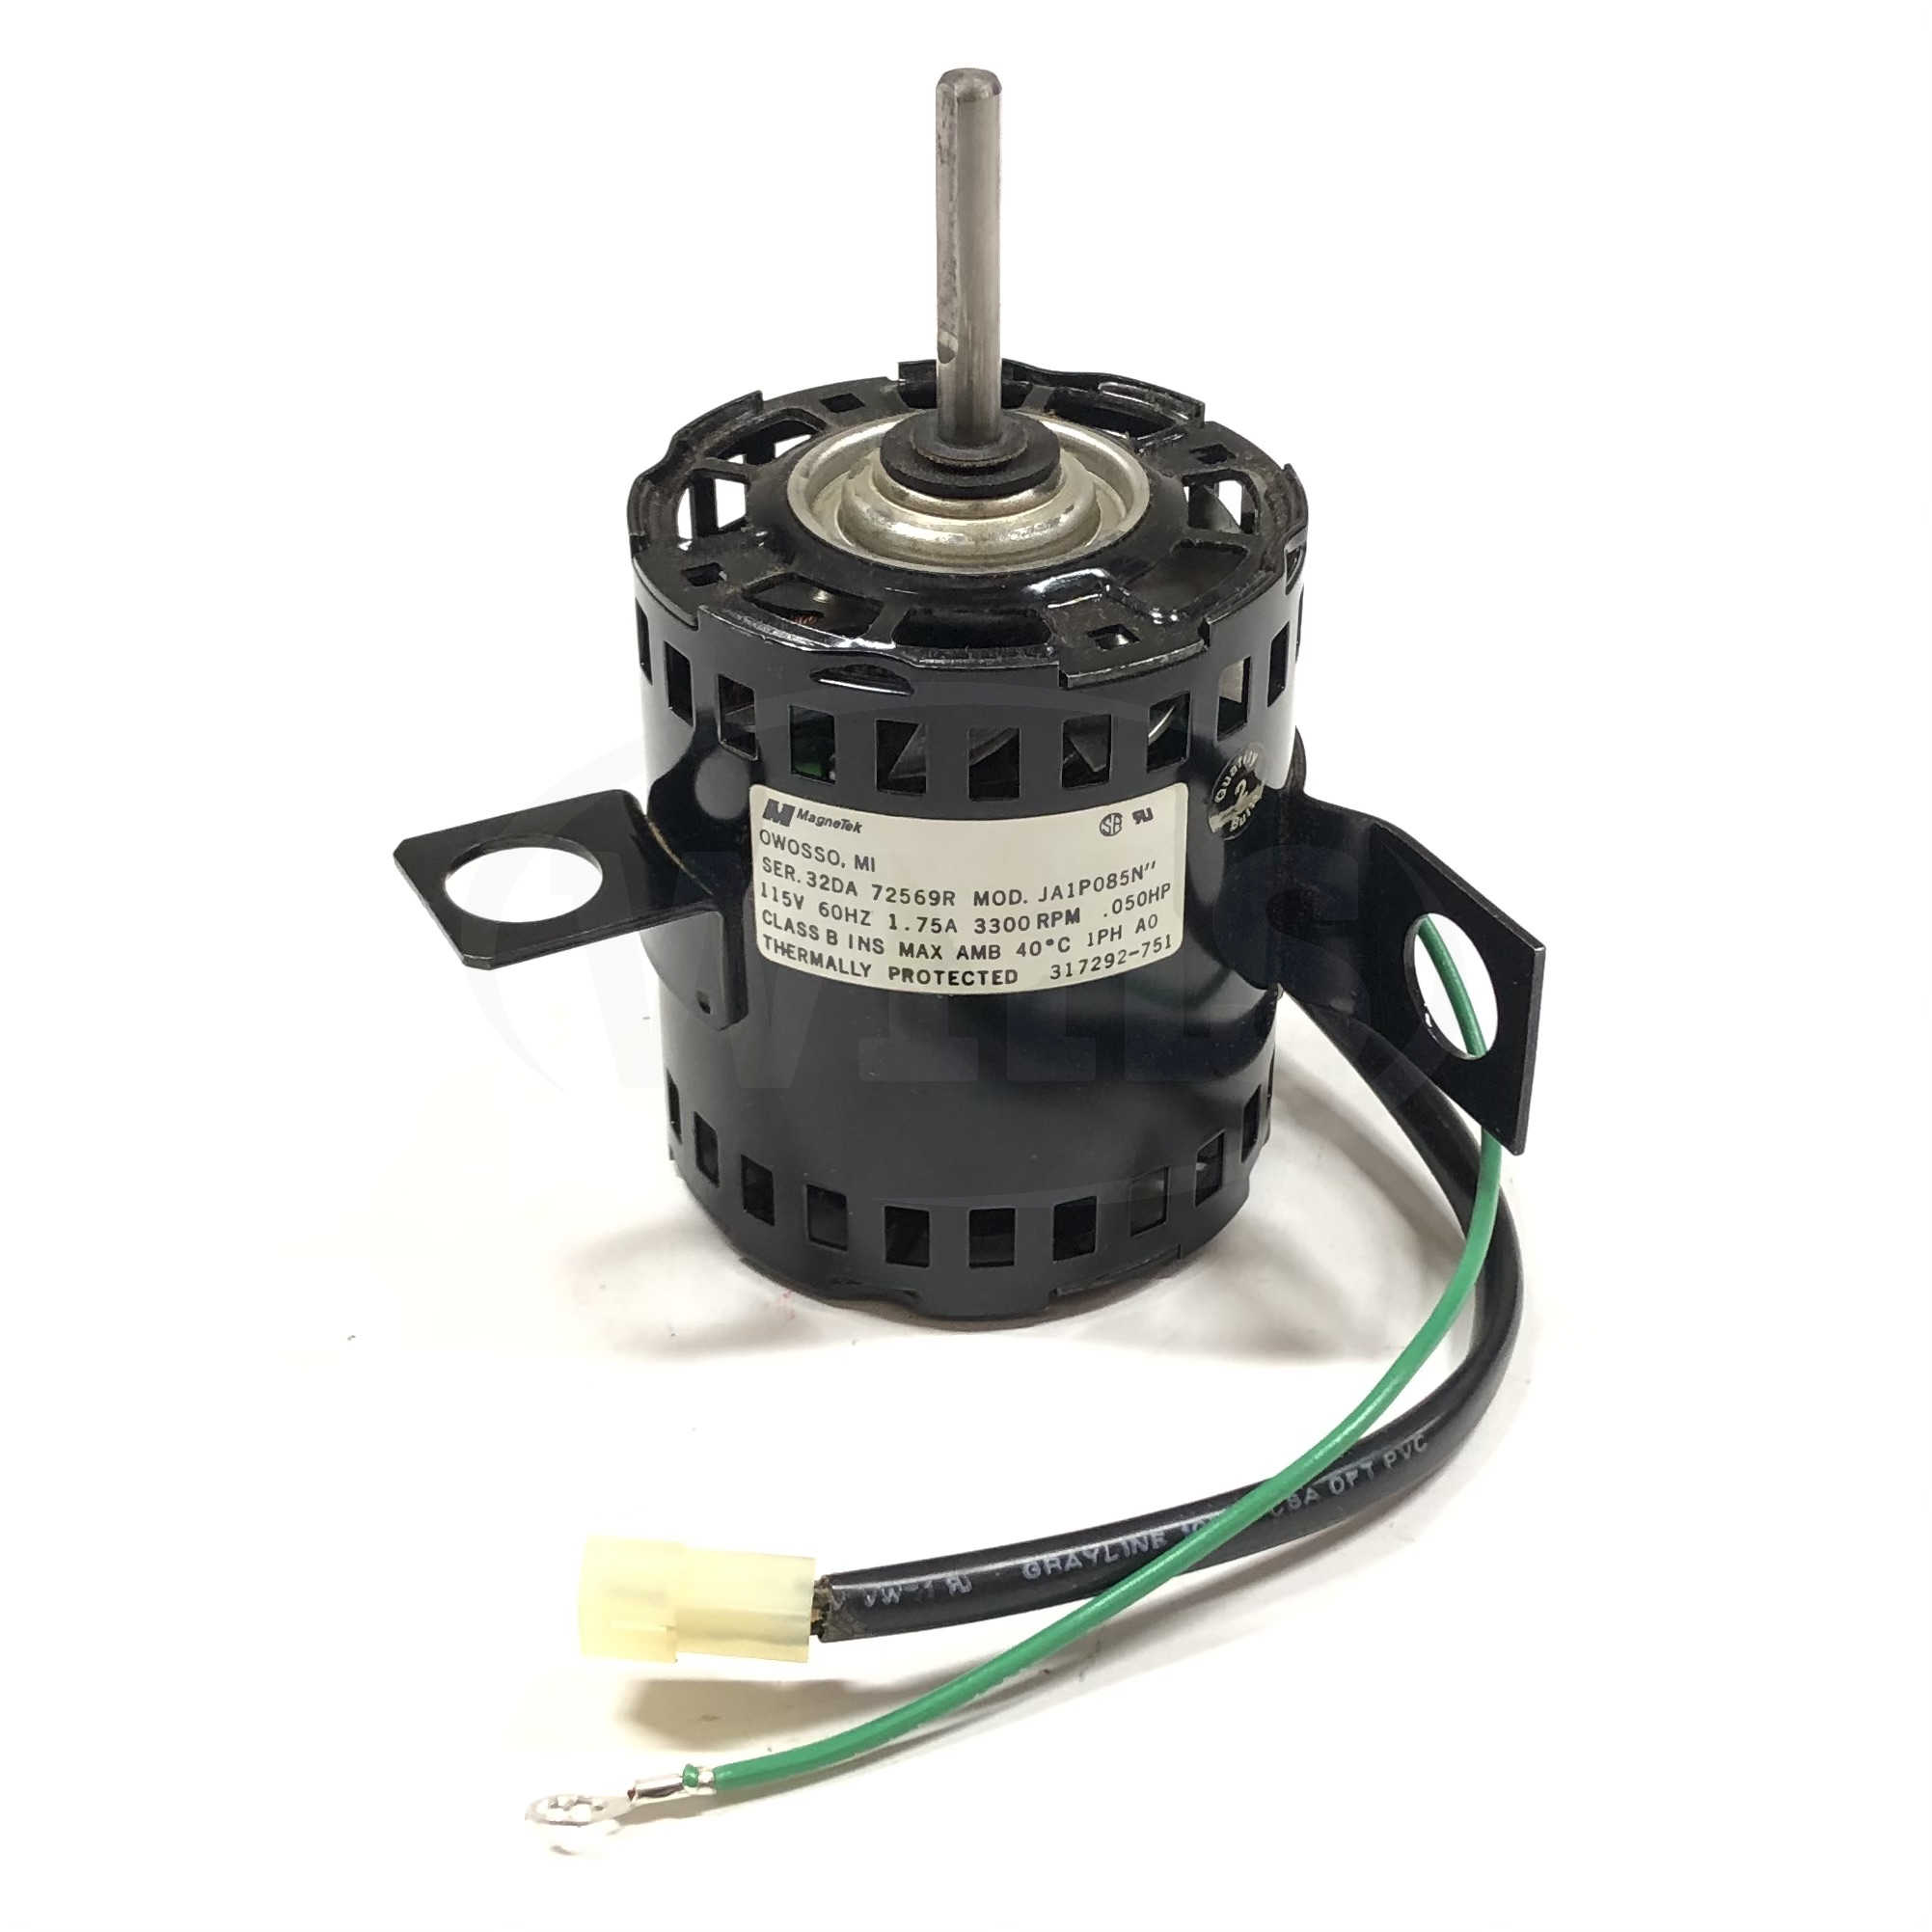 317292-753 Factory Authorized Parts™ Inducer Motor Assembly 5